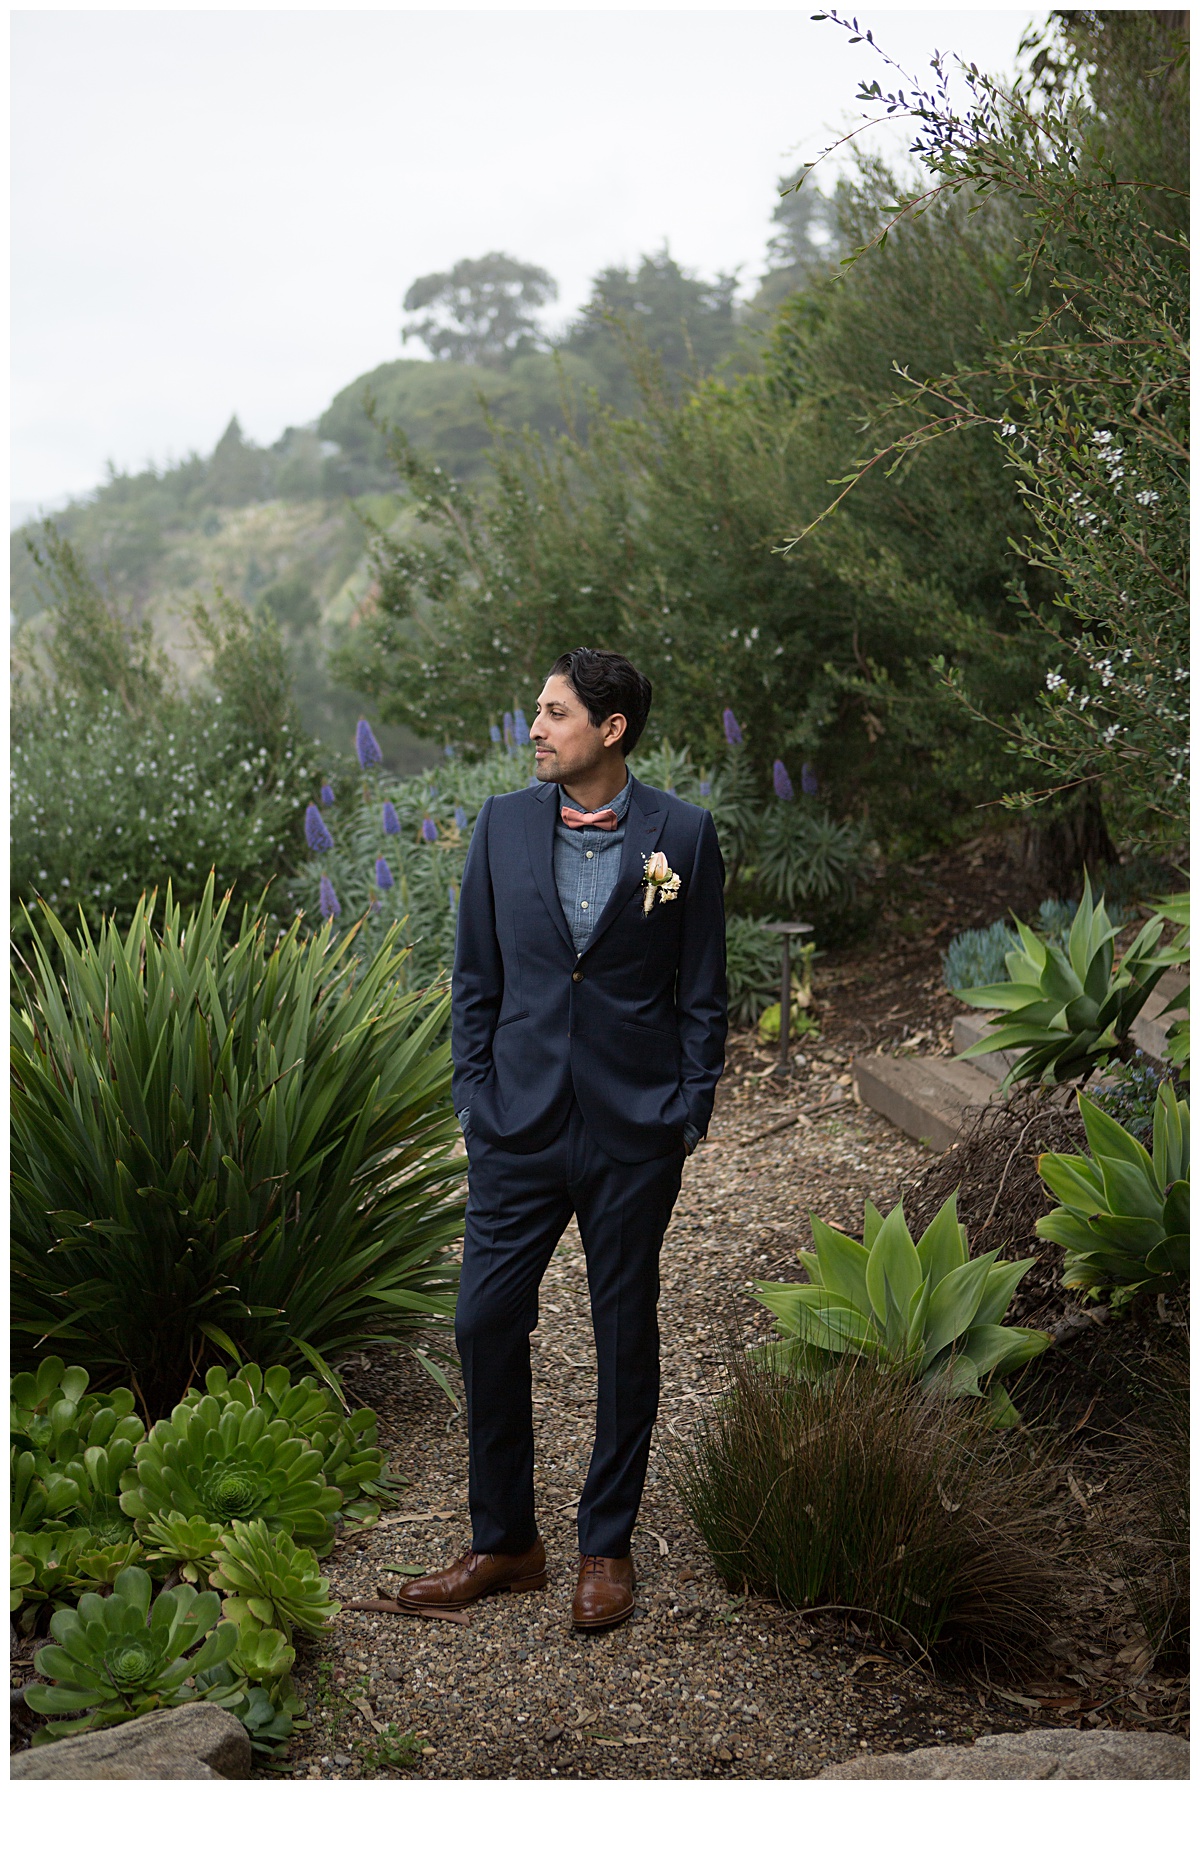 groom waiting for his bride to come down for a first look. Surrounded by California large succulents and dressed with a dark suite, denim under dress shirt and pink bowtie. He has a hipster vibe to him.
